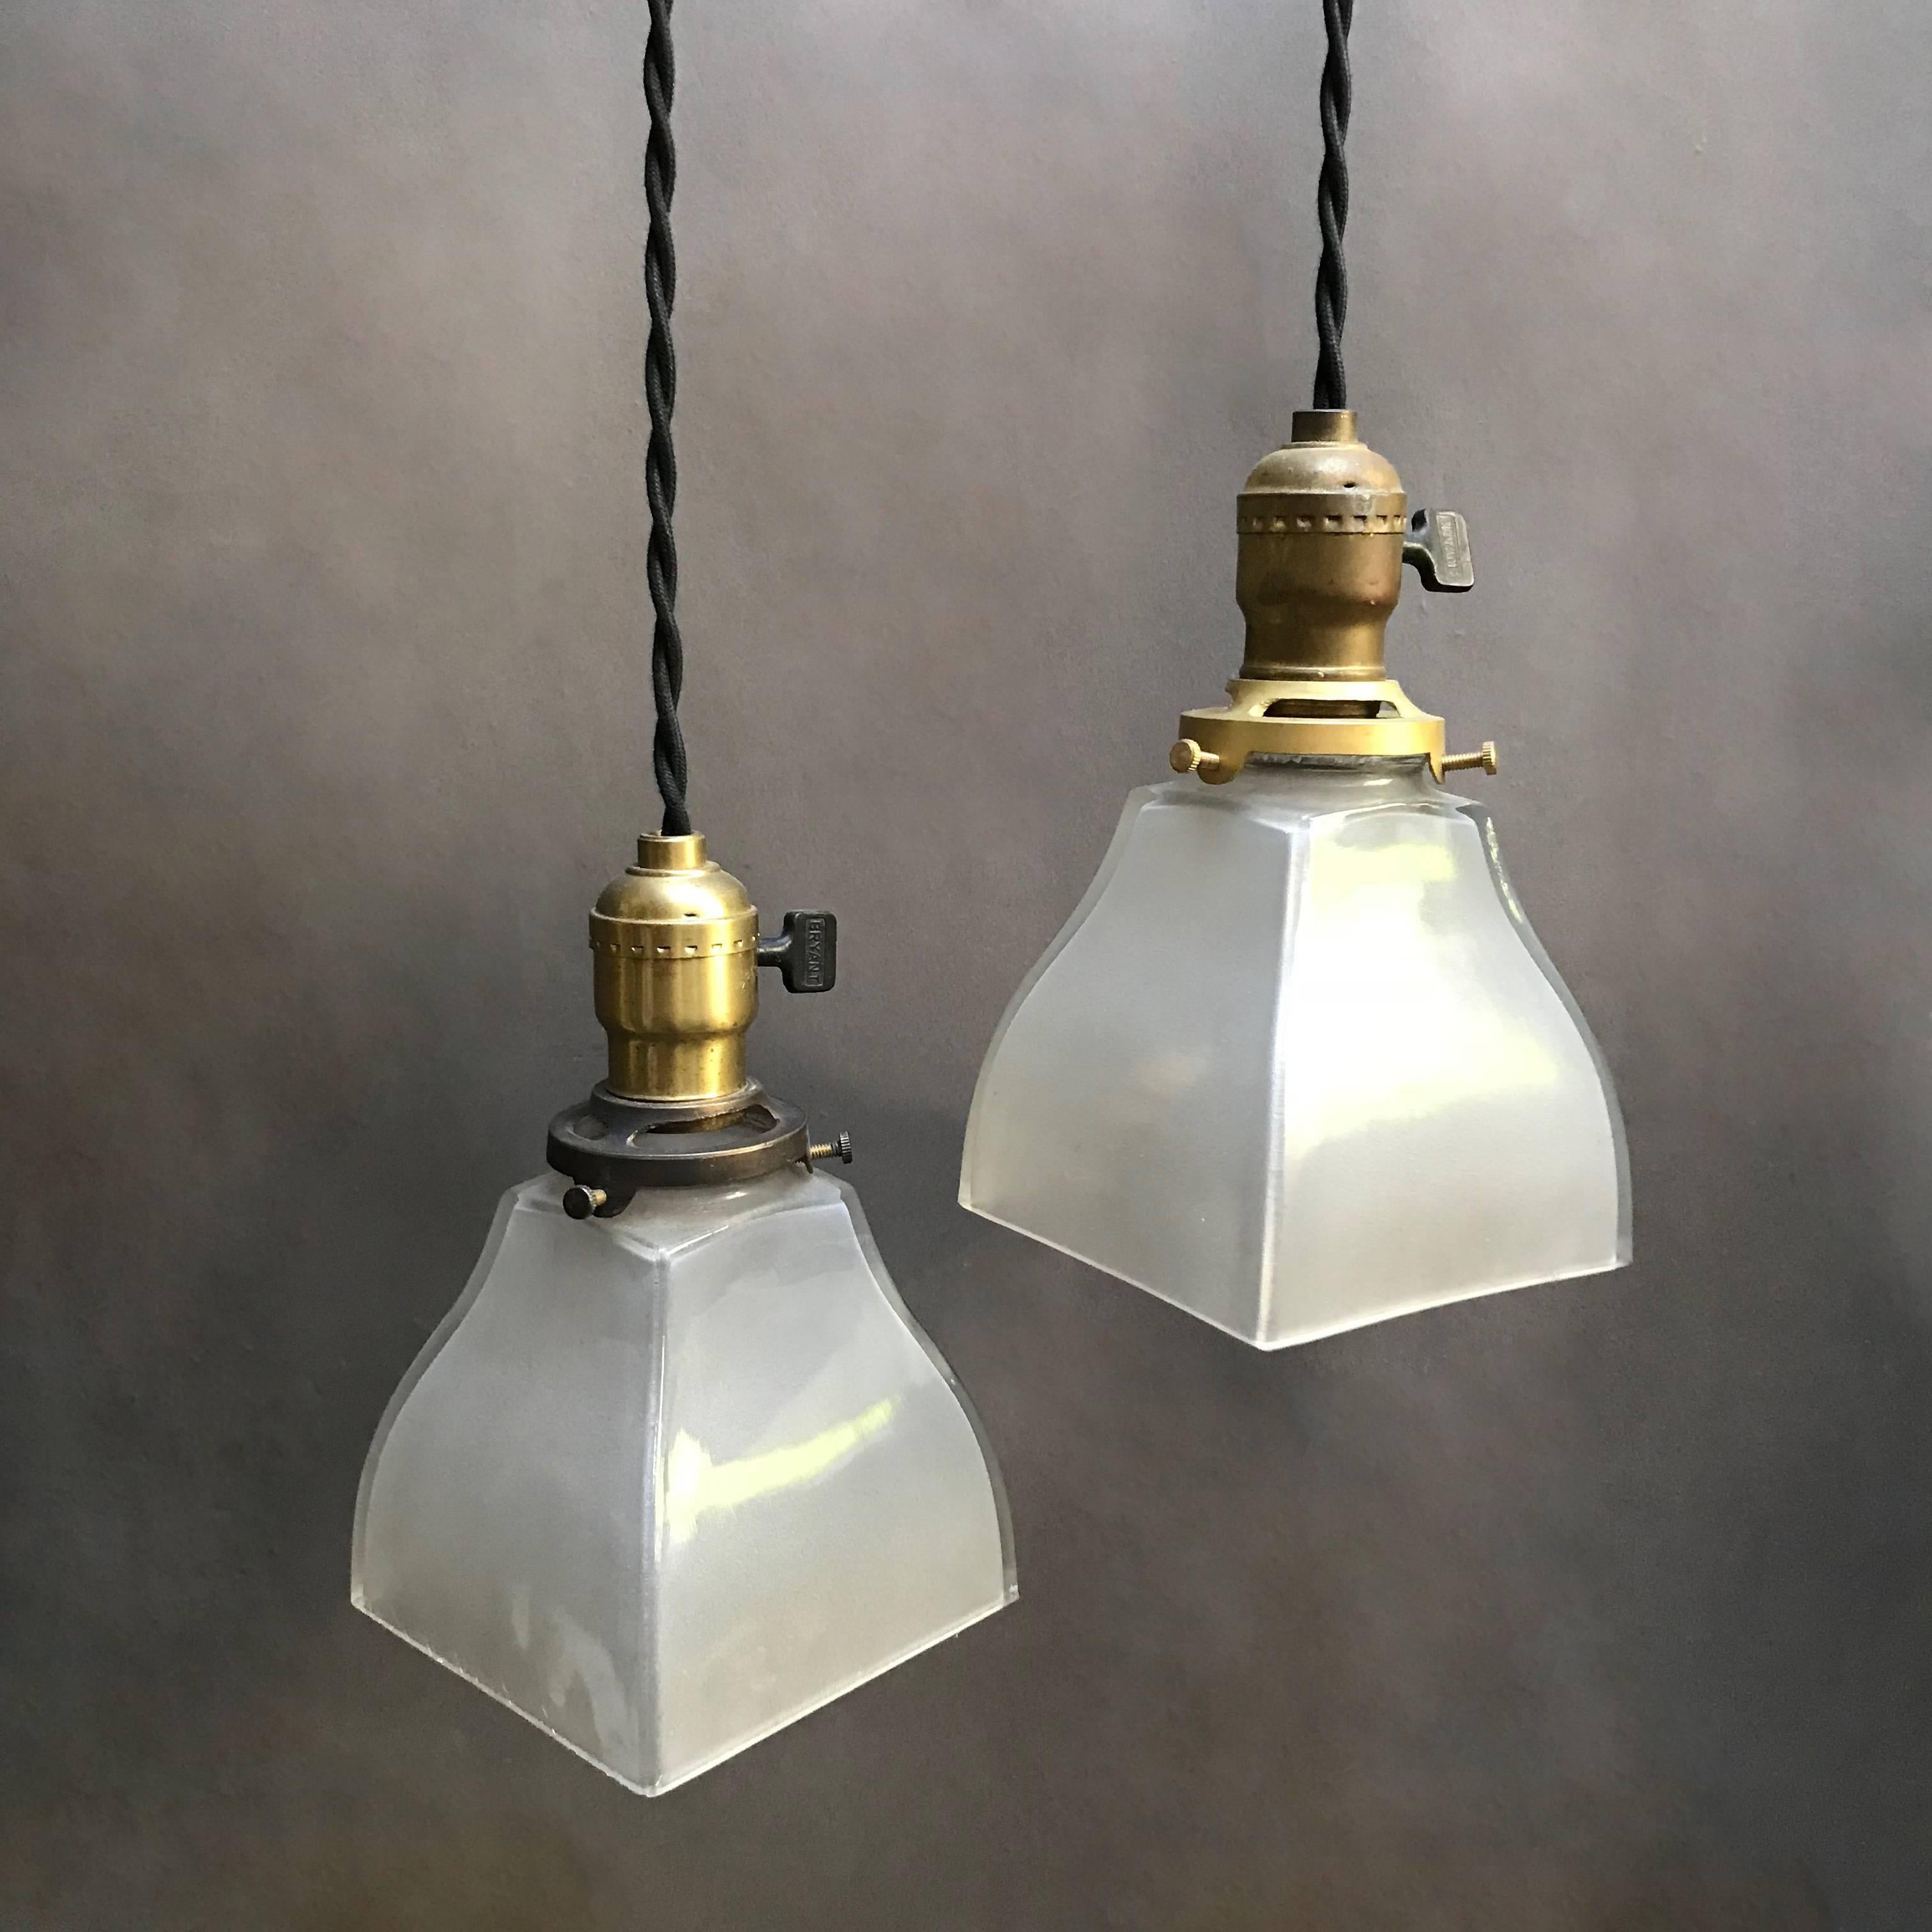 Pair of industrial pendant lights feature squared, open, frosted glass shades with brass switch fitters are newly wired with 40 inches of braided black cloth cord to accept up to 150 watt bulbs each.